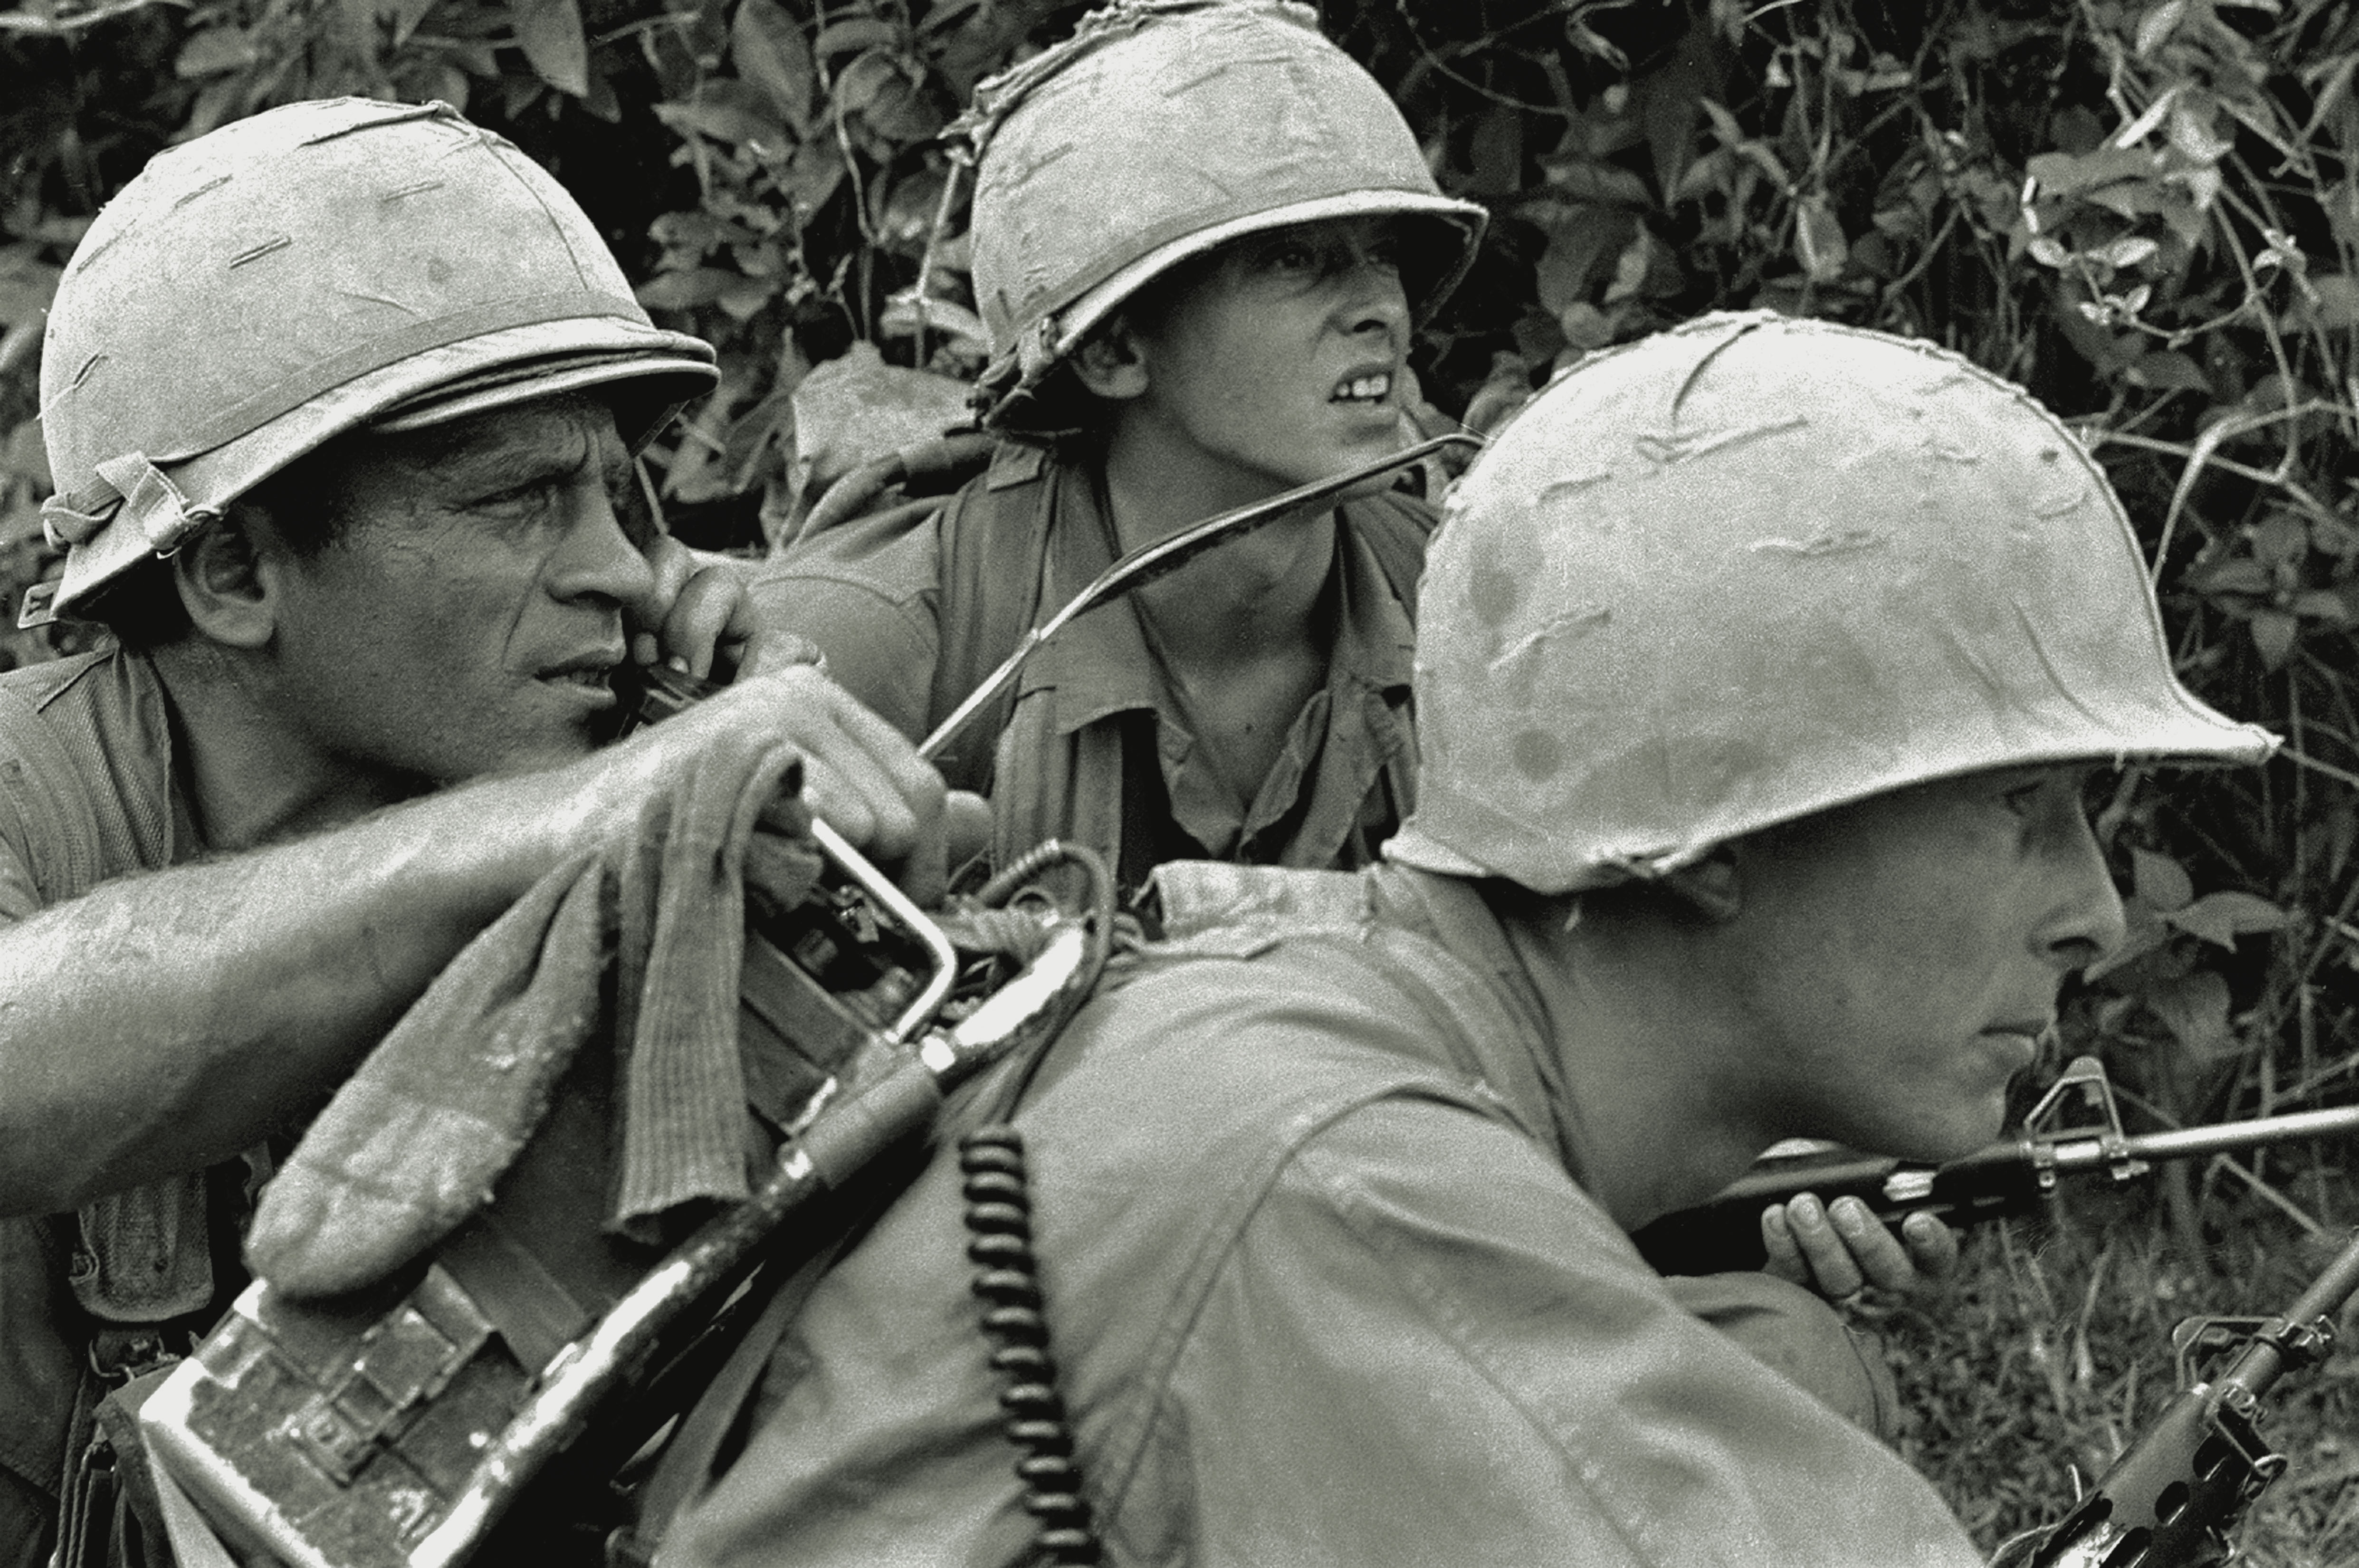 Staff Sgt. Joe Musial, on the radio, in Company D, 1st Battalion, 8th Cavalry Regiment, 1st Cavalry Division (Airmobile), learns that the rest of his company is pinned down on the Bong Son plain of the central coastlands in February 1967. Just a couple of months earlier, in December 1966, Company D, 1st Battalion, 12th Cavalry Regiment, found itself in a similar predicament in the same region. / Robert Hodierne